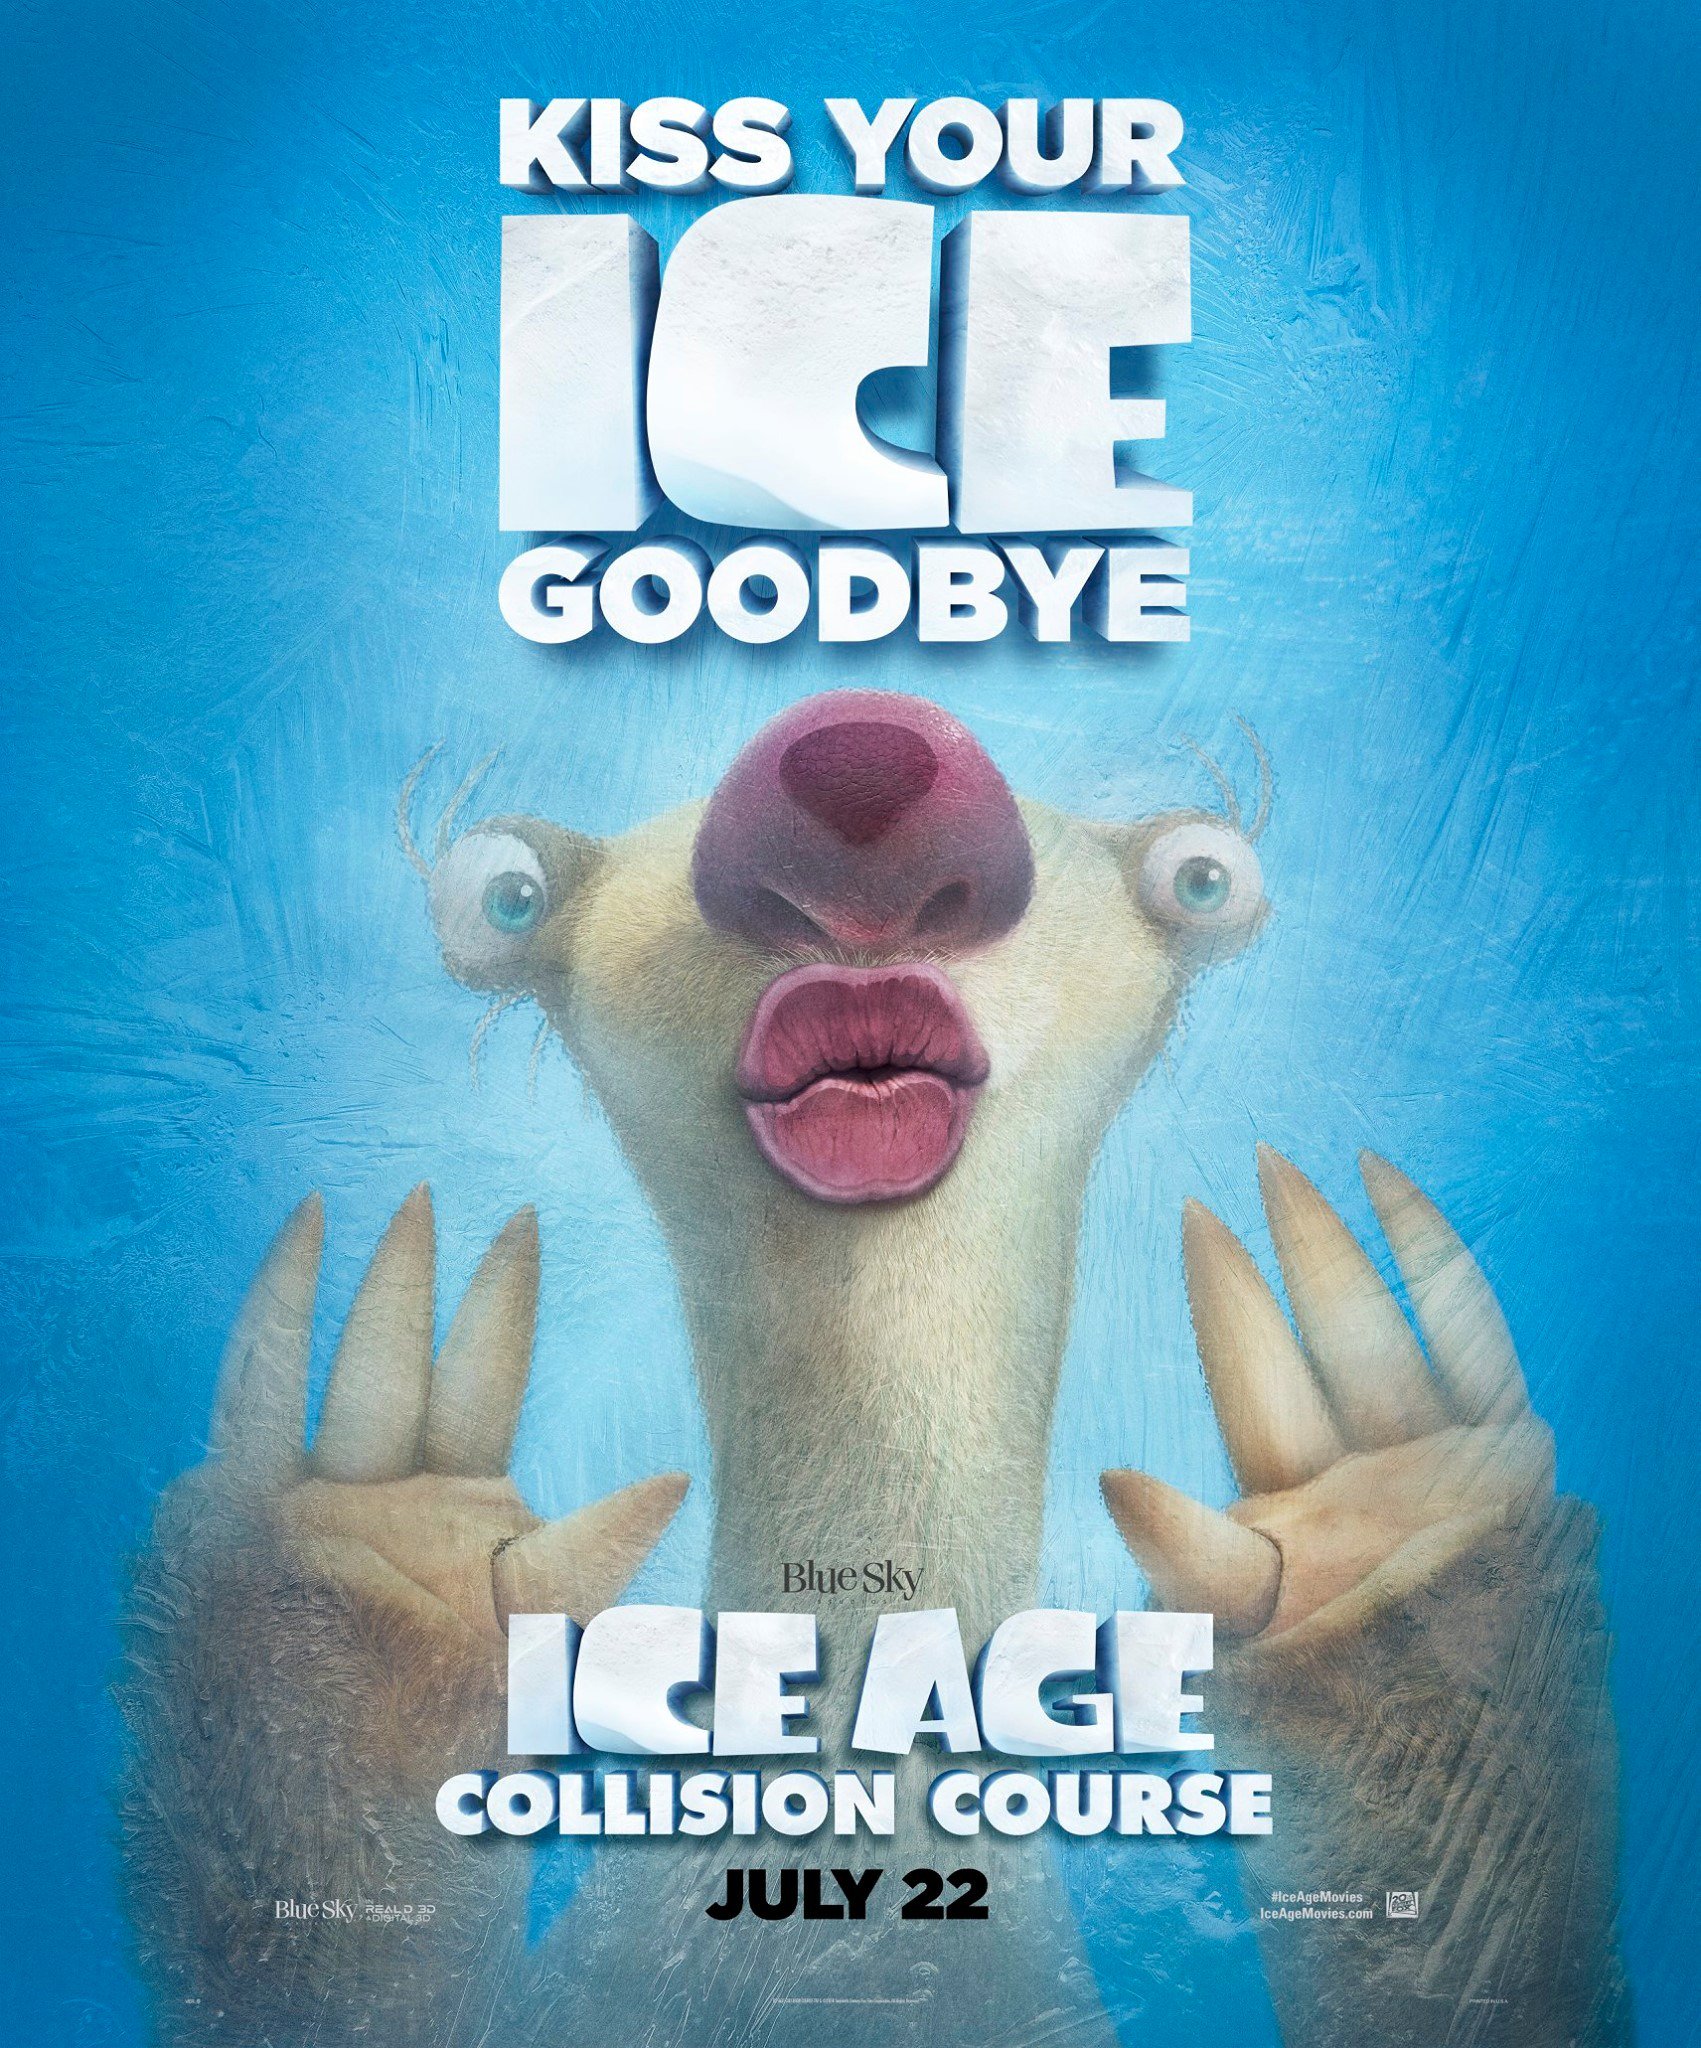 ice age on twitter "kiss your ice goodbye iceage